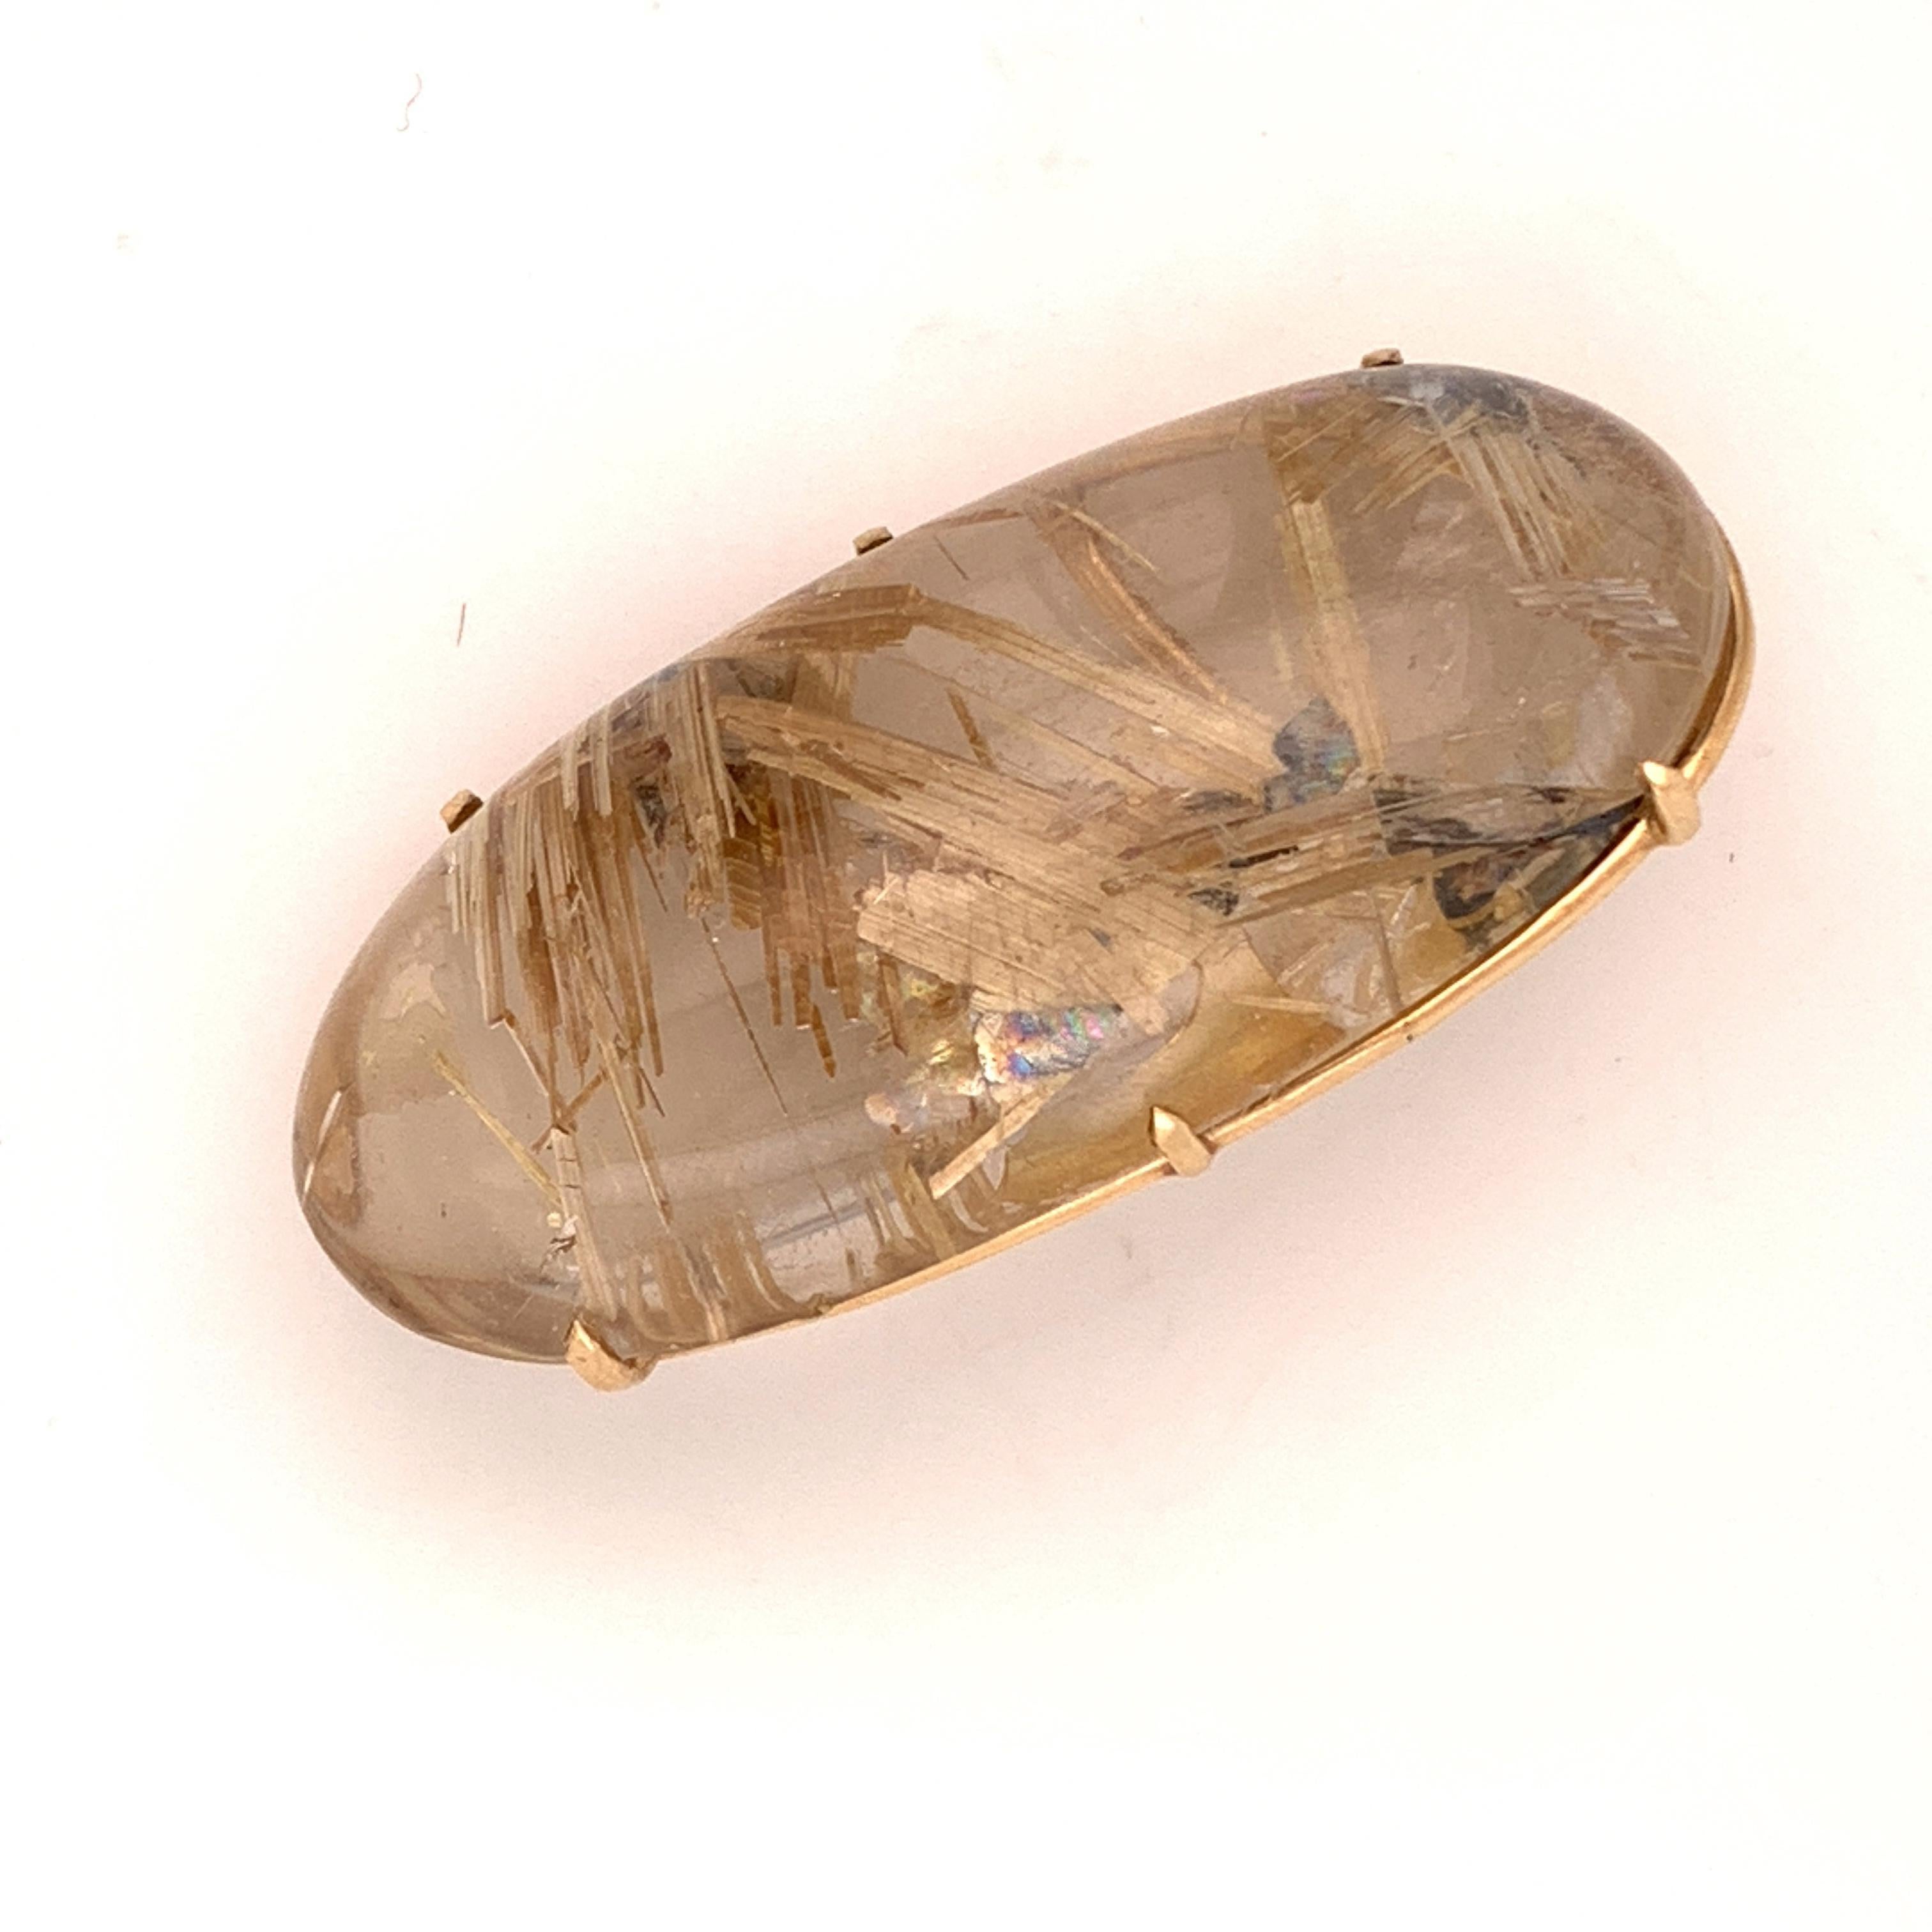 This stunning one of a kind brooch is versatile and can also be worn as a pendant. It features a big gorgeous rutilated quartz set in a six prong basket of 10K yellow gold. The striking clear stone looks as though it is threaded with gold and so it